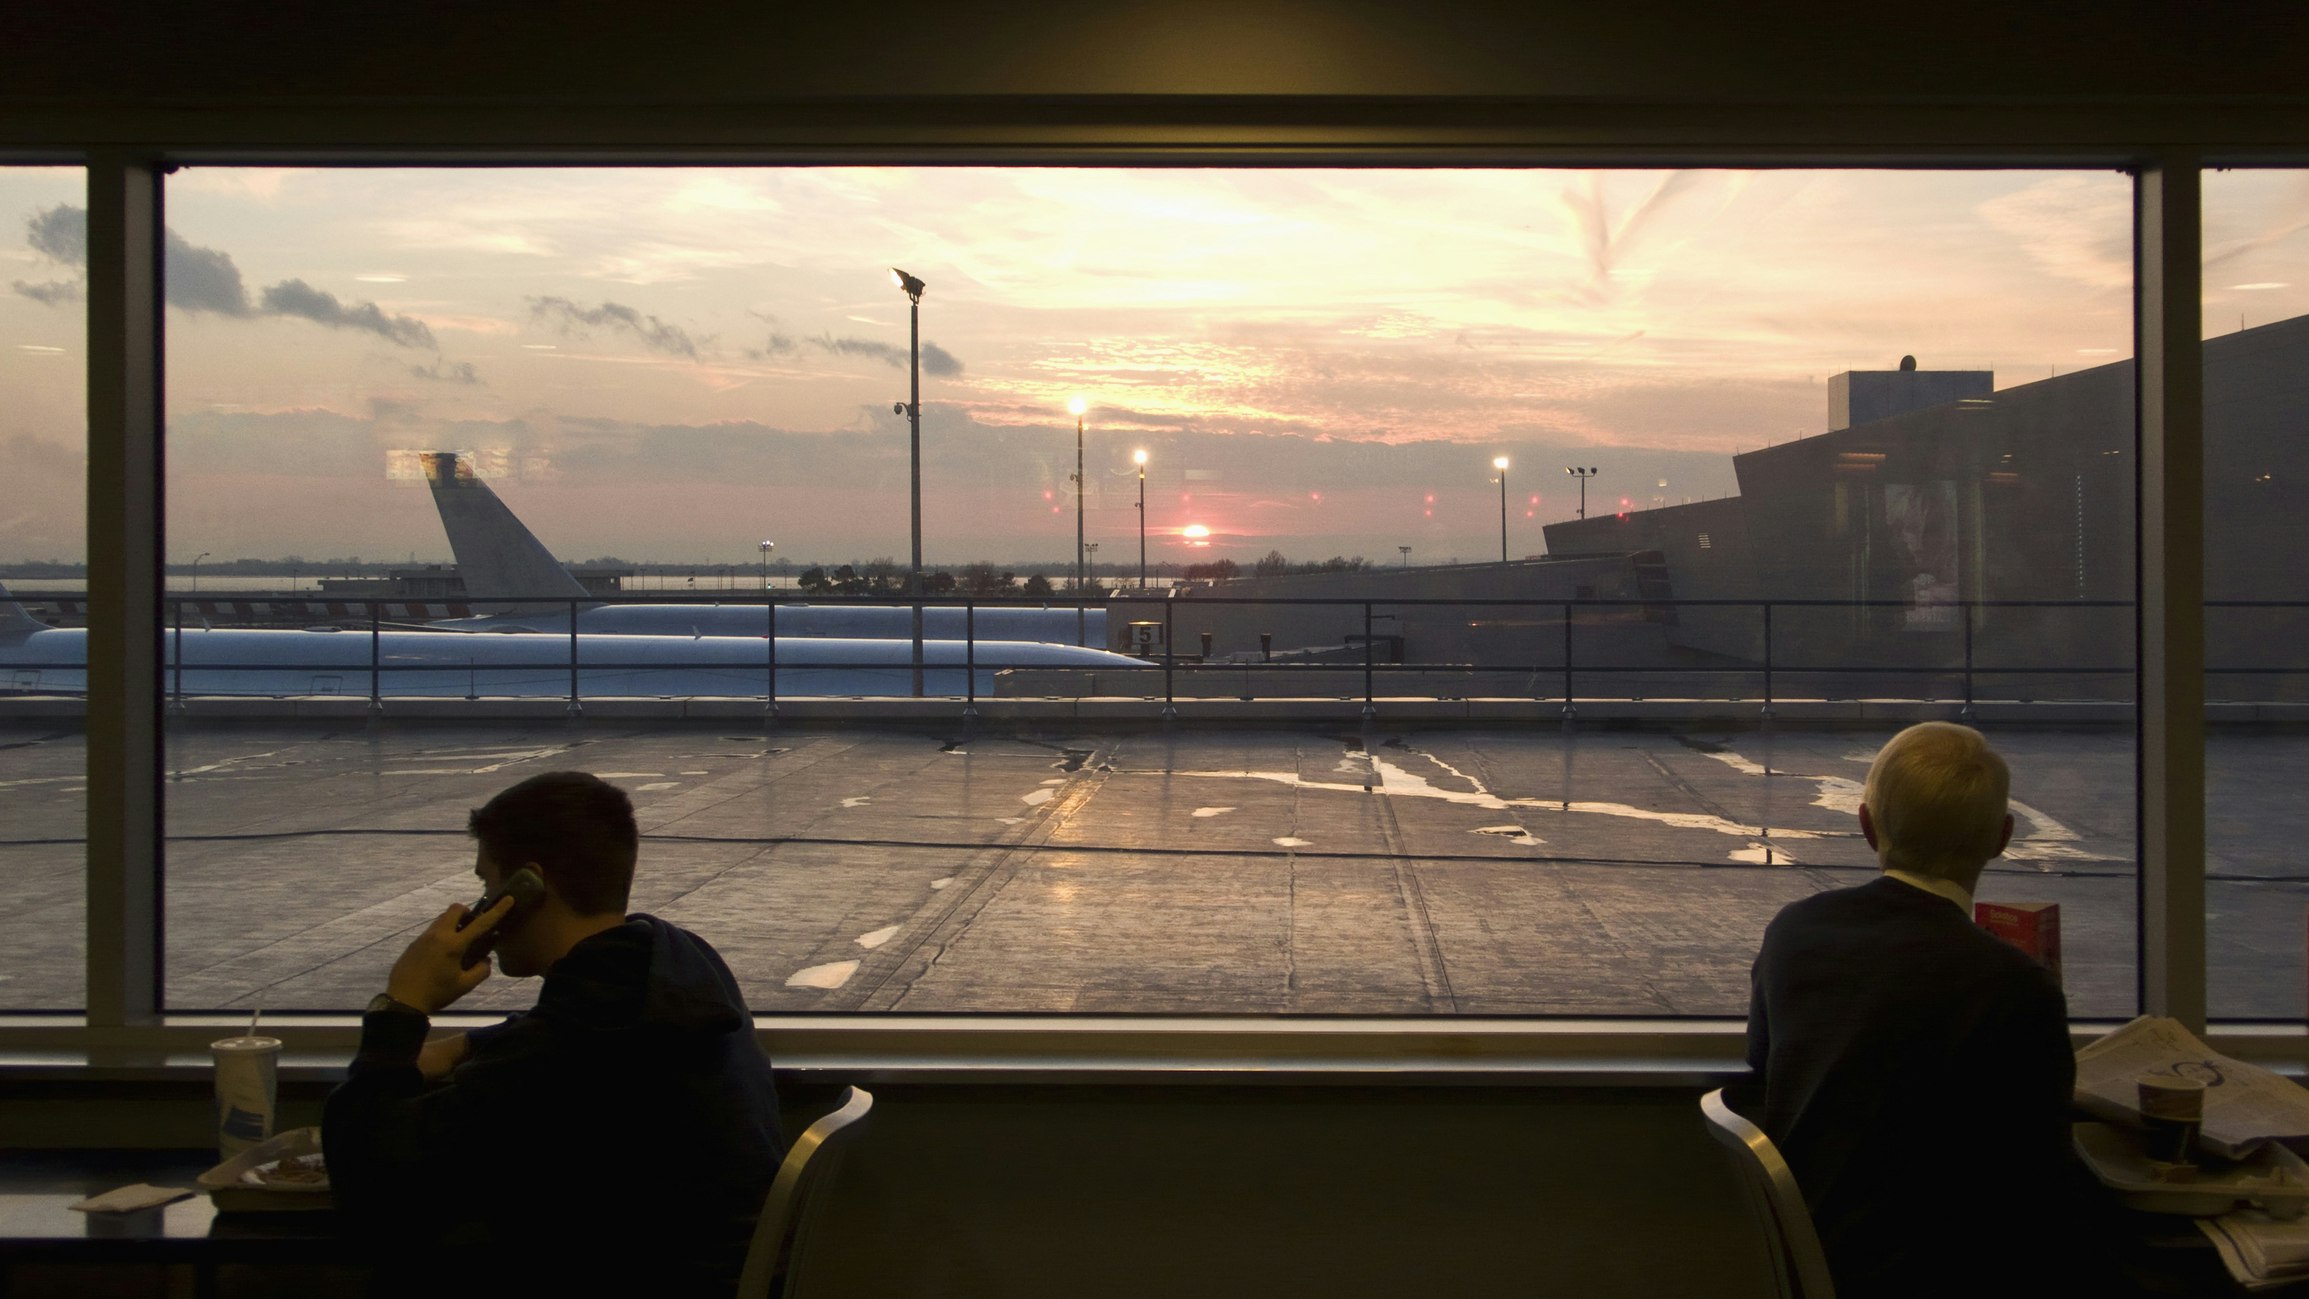 Two men, one younger and one older, sit in dark clothing almost silhouetted against the air terminal outside at sunrise